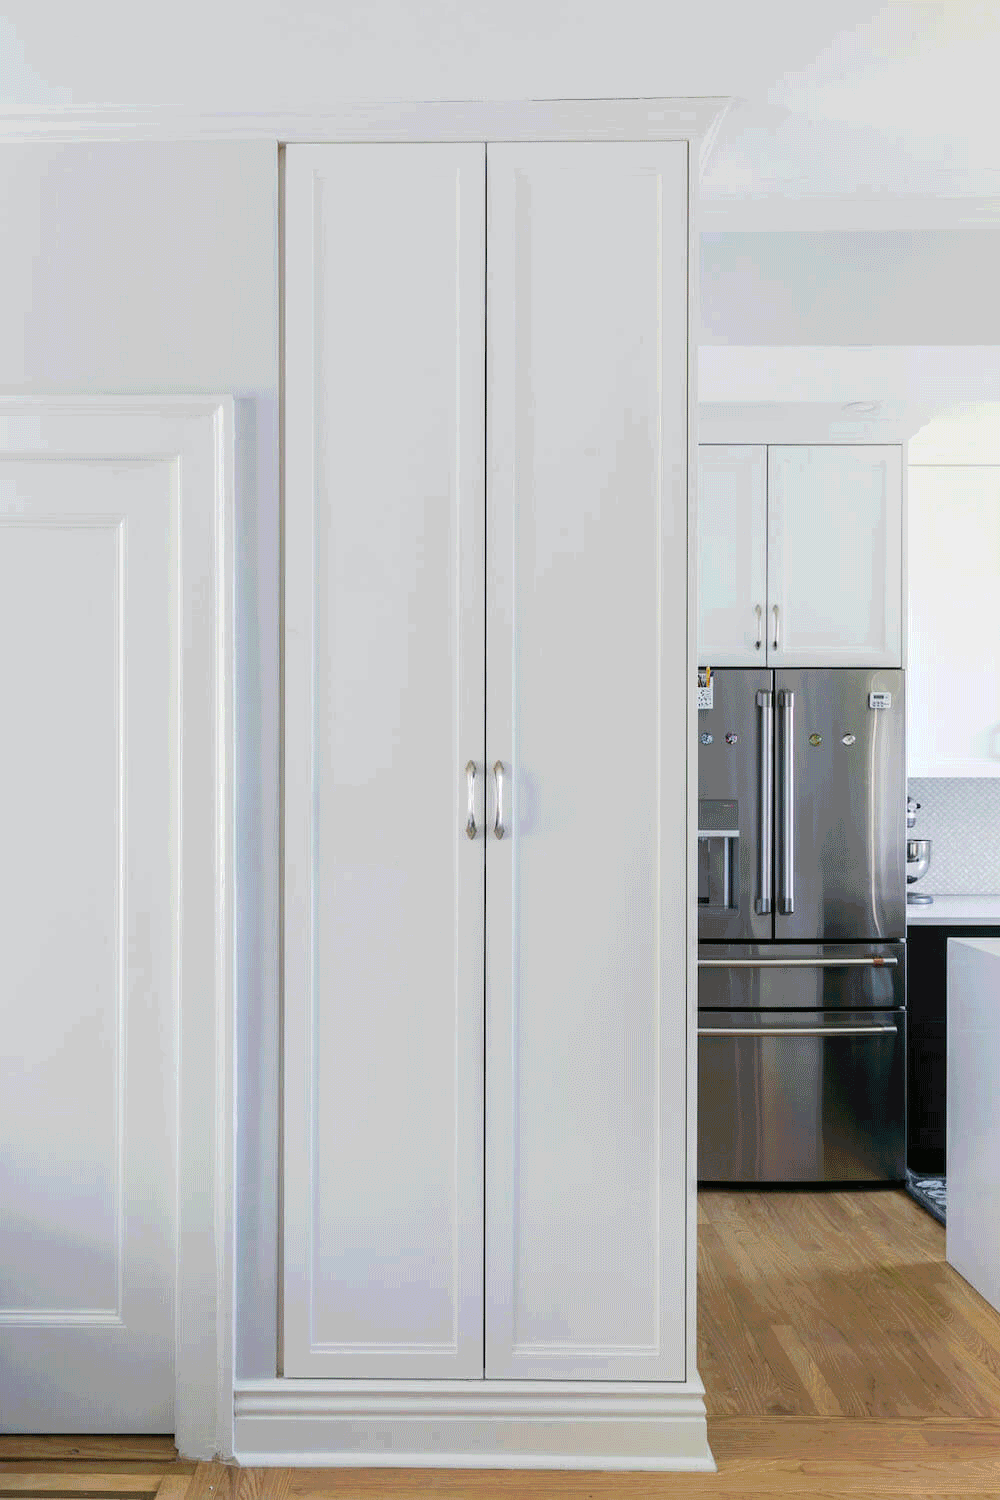 Built-in kitchen closet storage with doors opening and closing